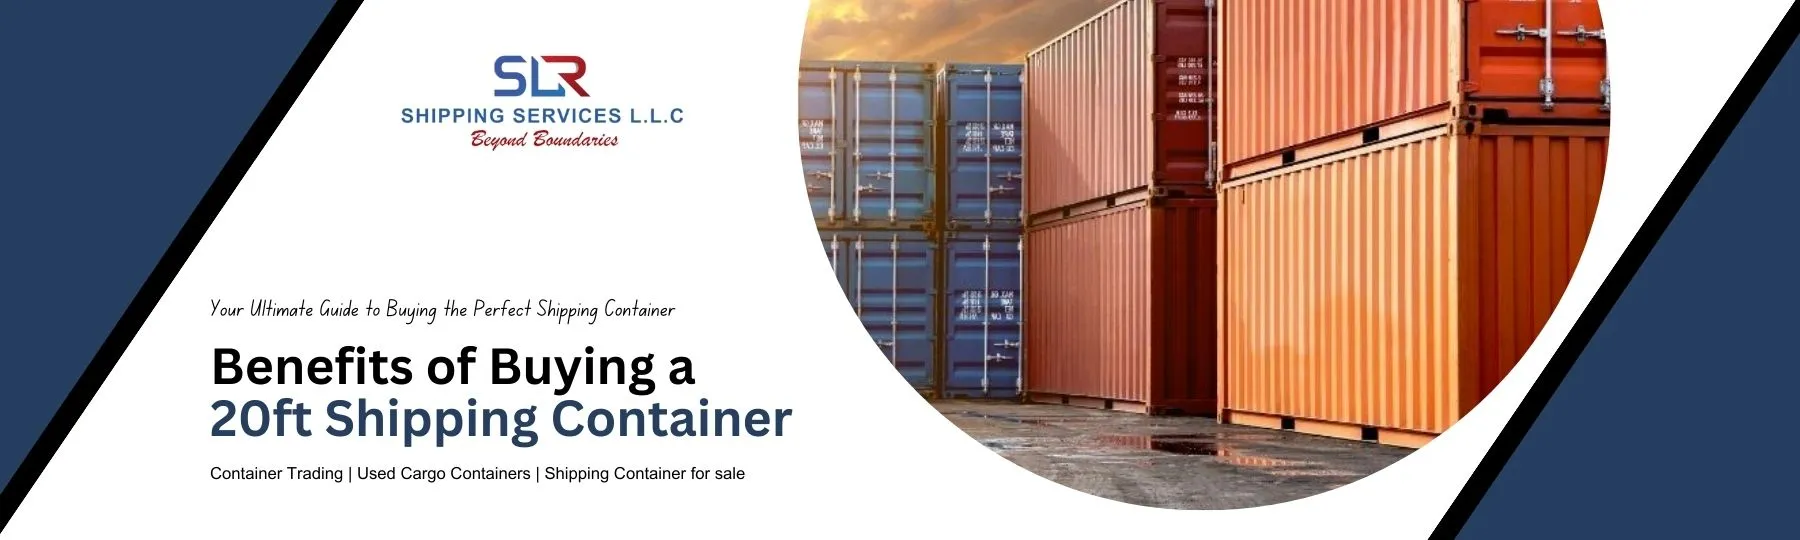 Buying Your 20ft Shipping Container for sale with SLR Shipping